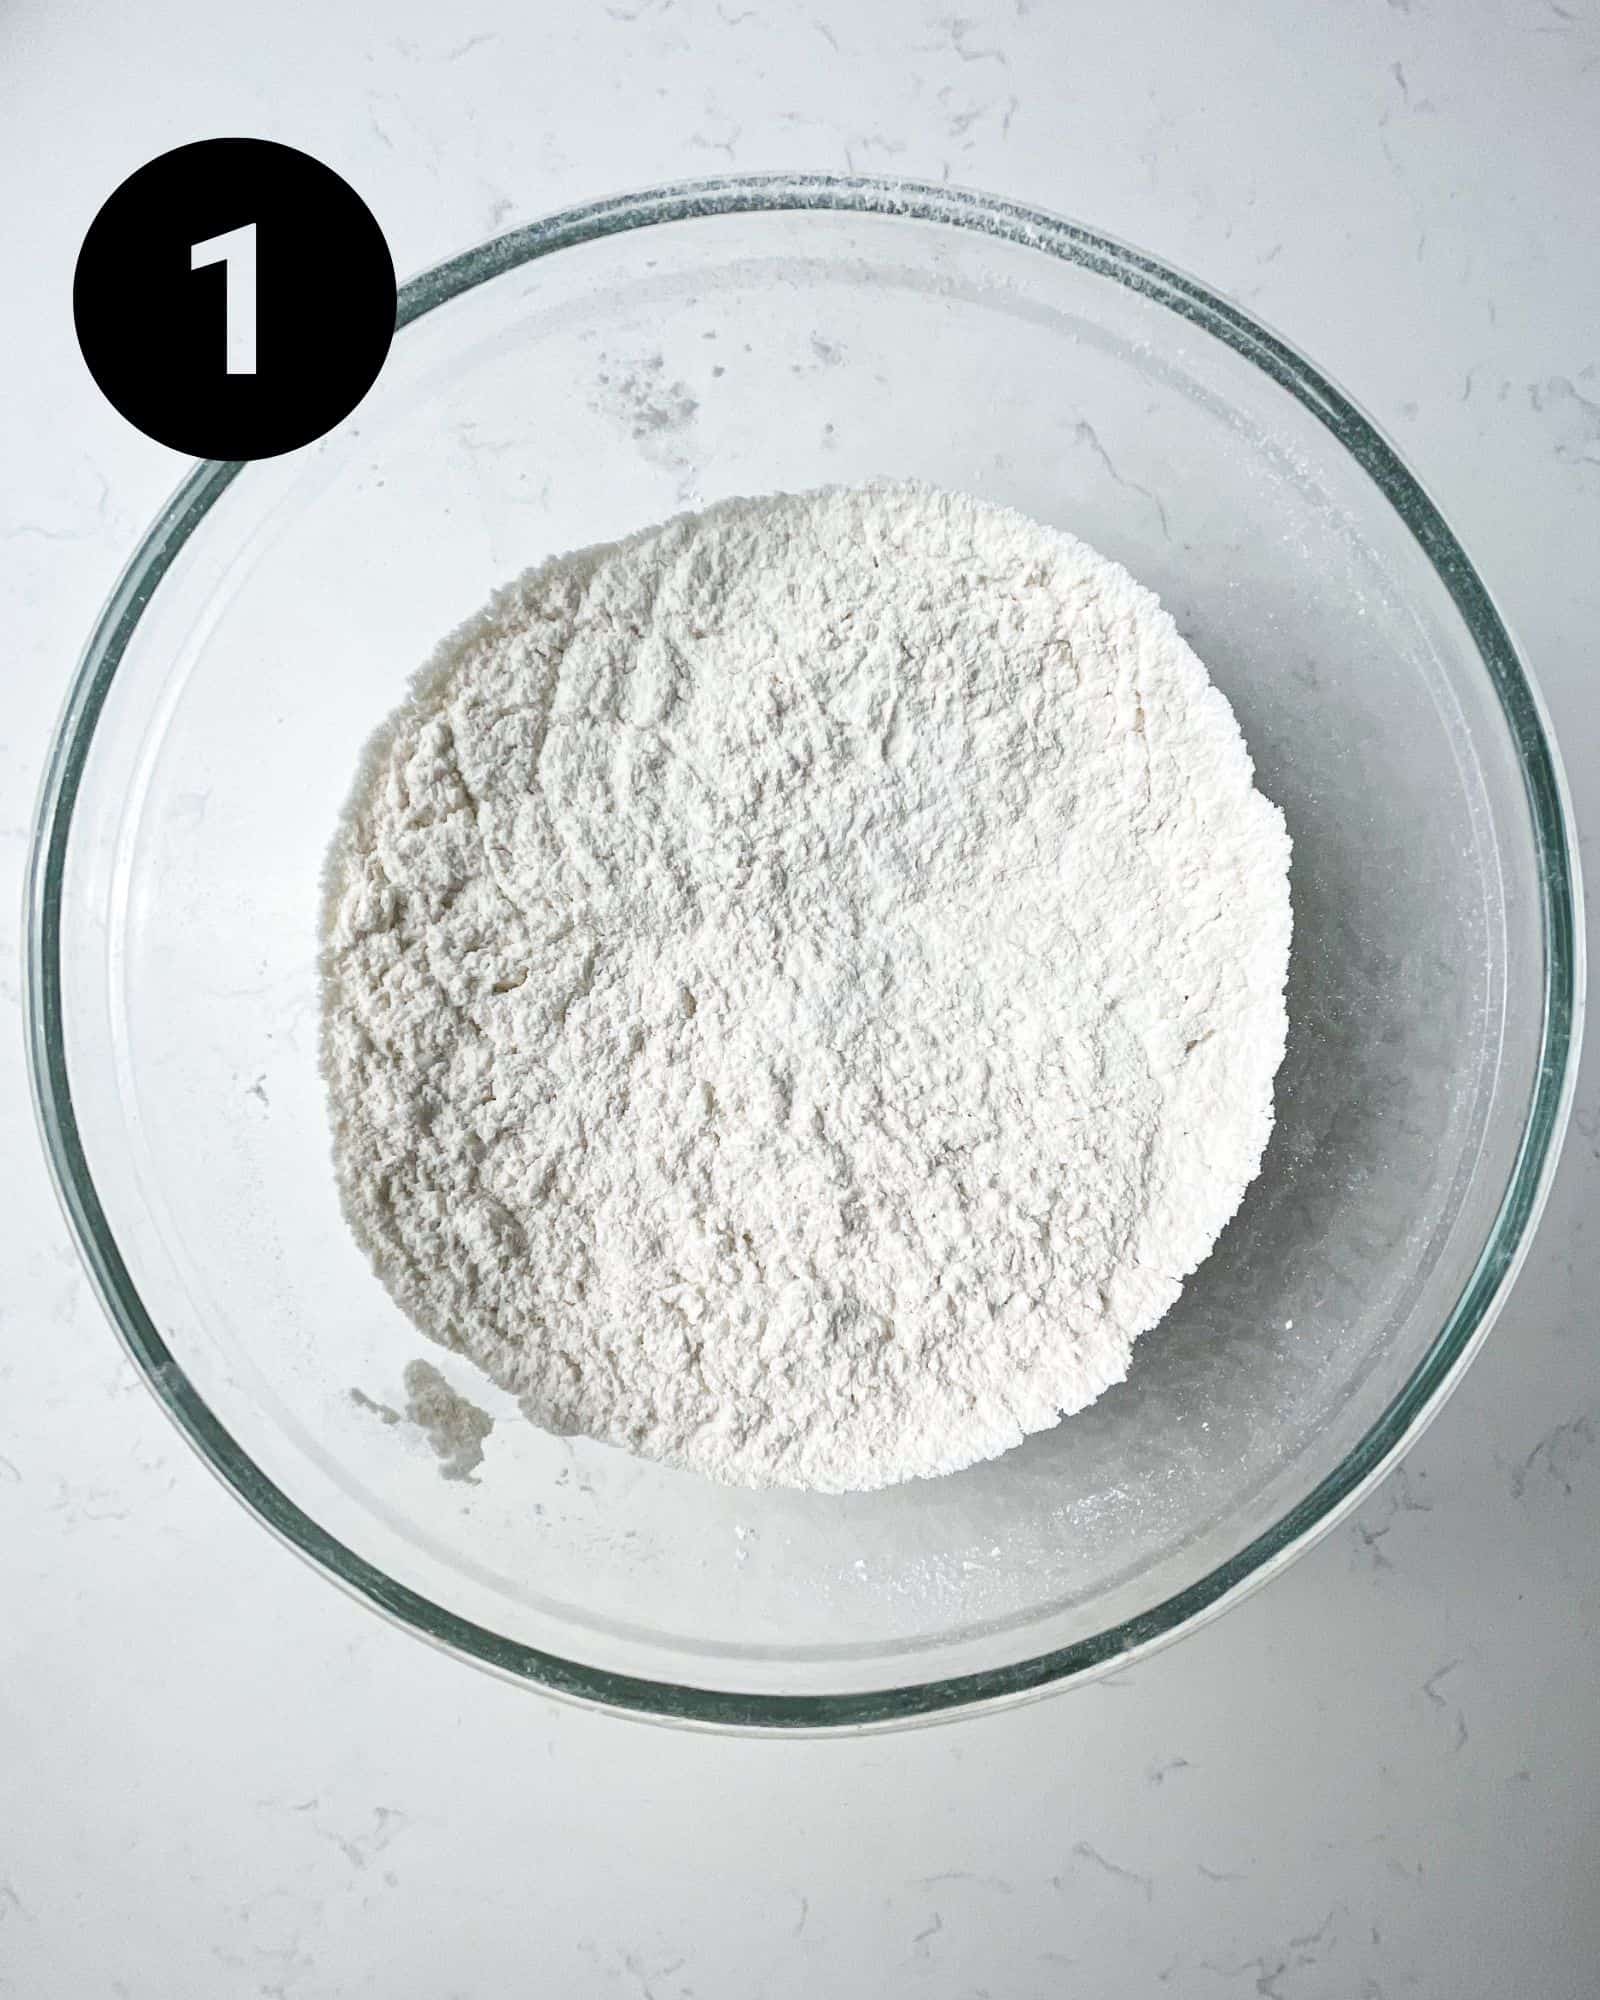 flour, baking powder, baking soda, and salt mixed together in a mixing bowl.